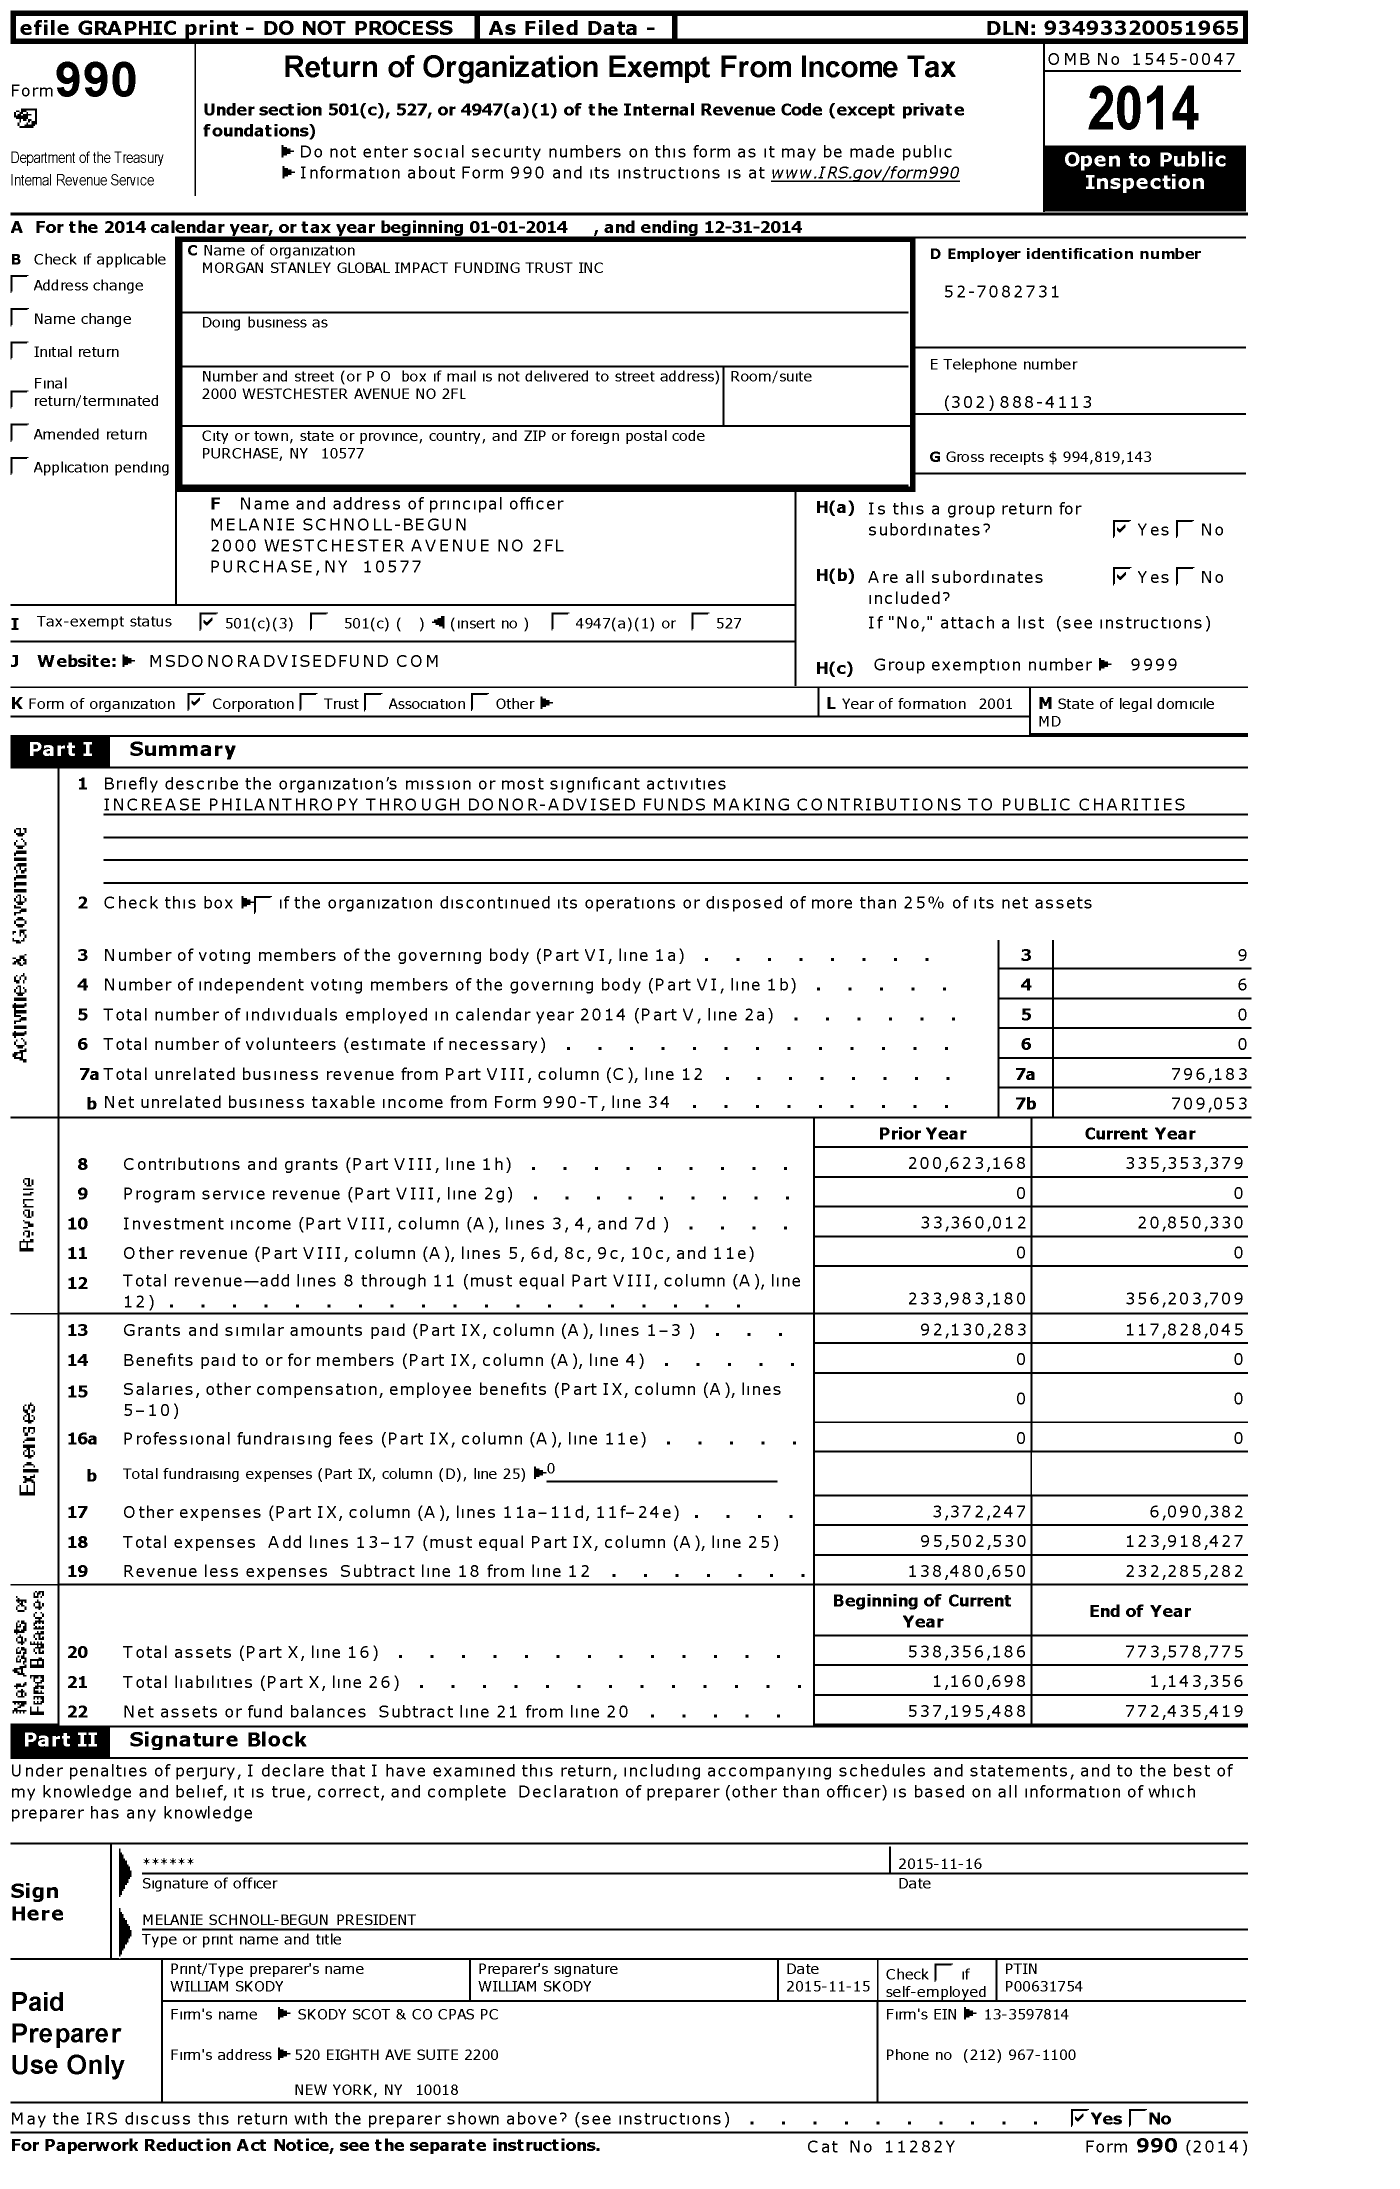 Image of first page of 2014 Form 990 for Morgan Stanley Global Impact Funding Trust